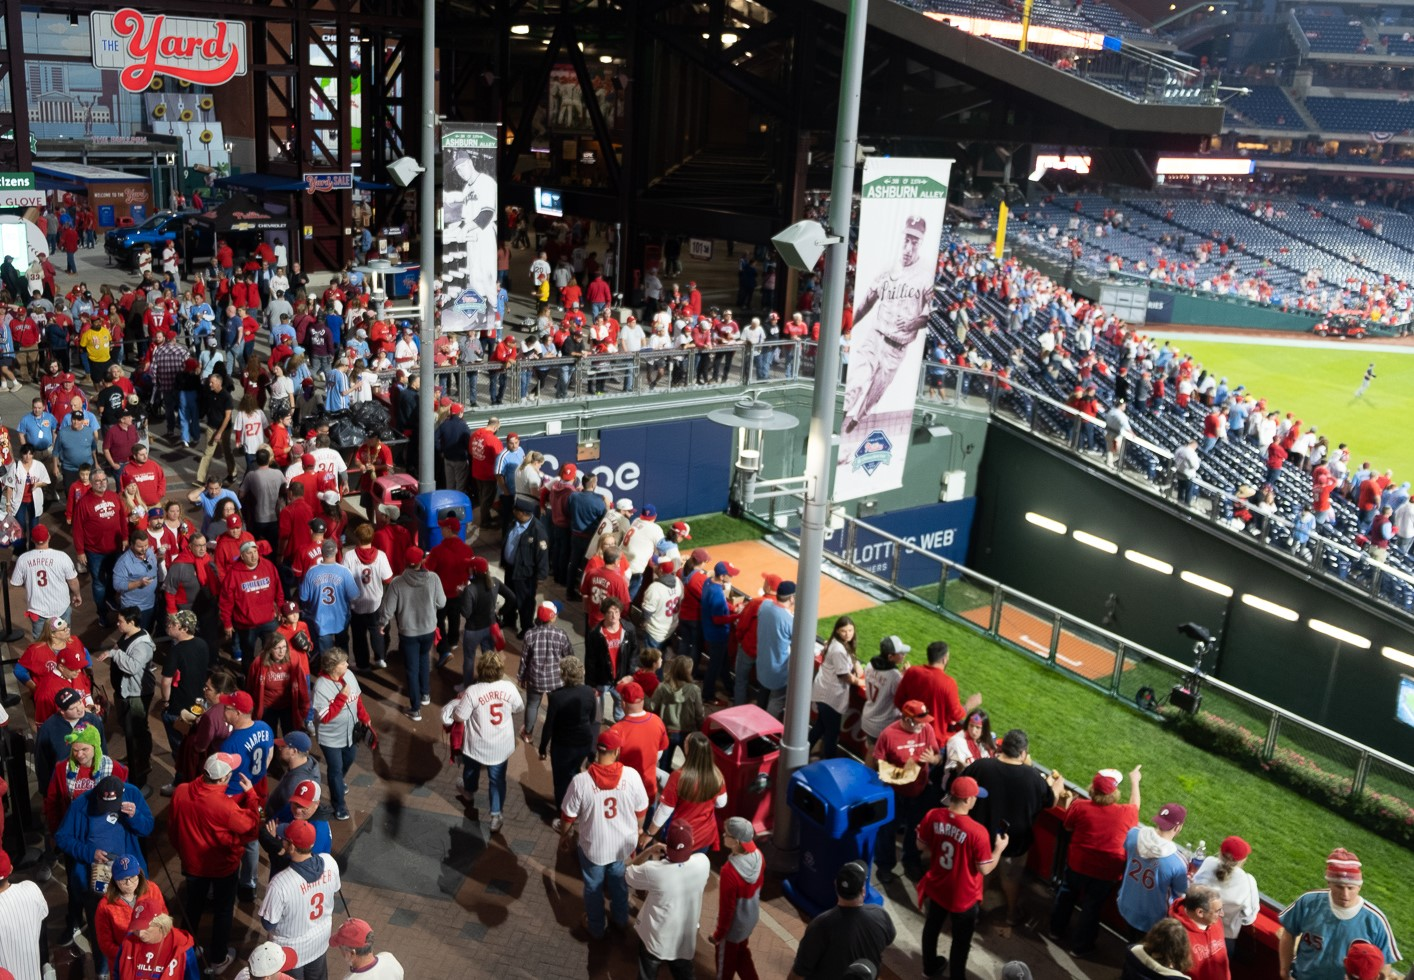 MLB to launch facial recognition ticket program at Citizens Bank Park